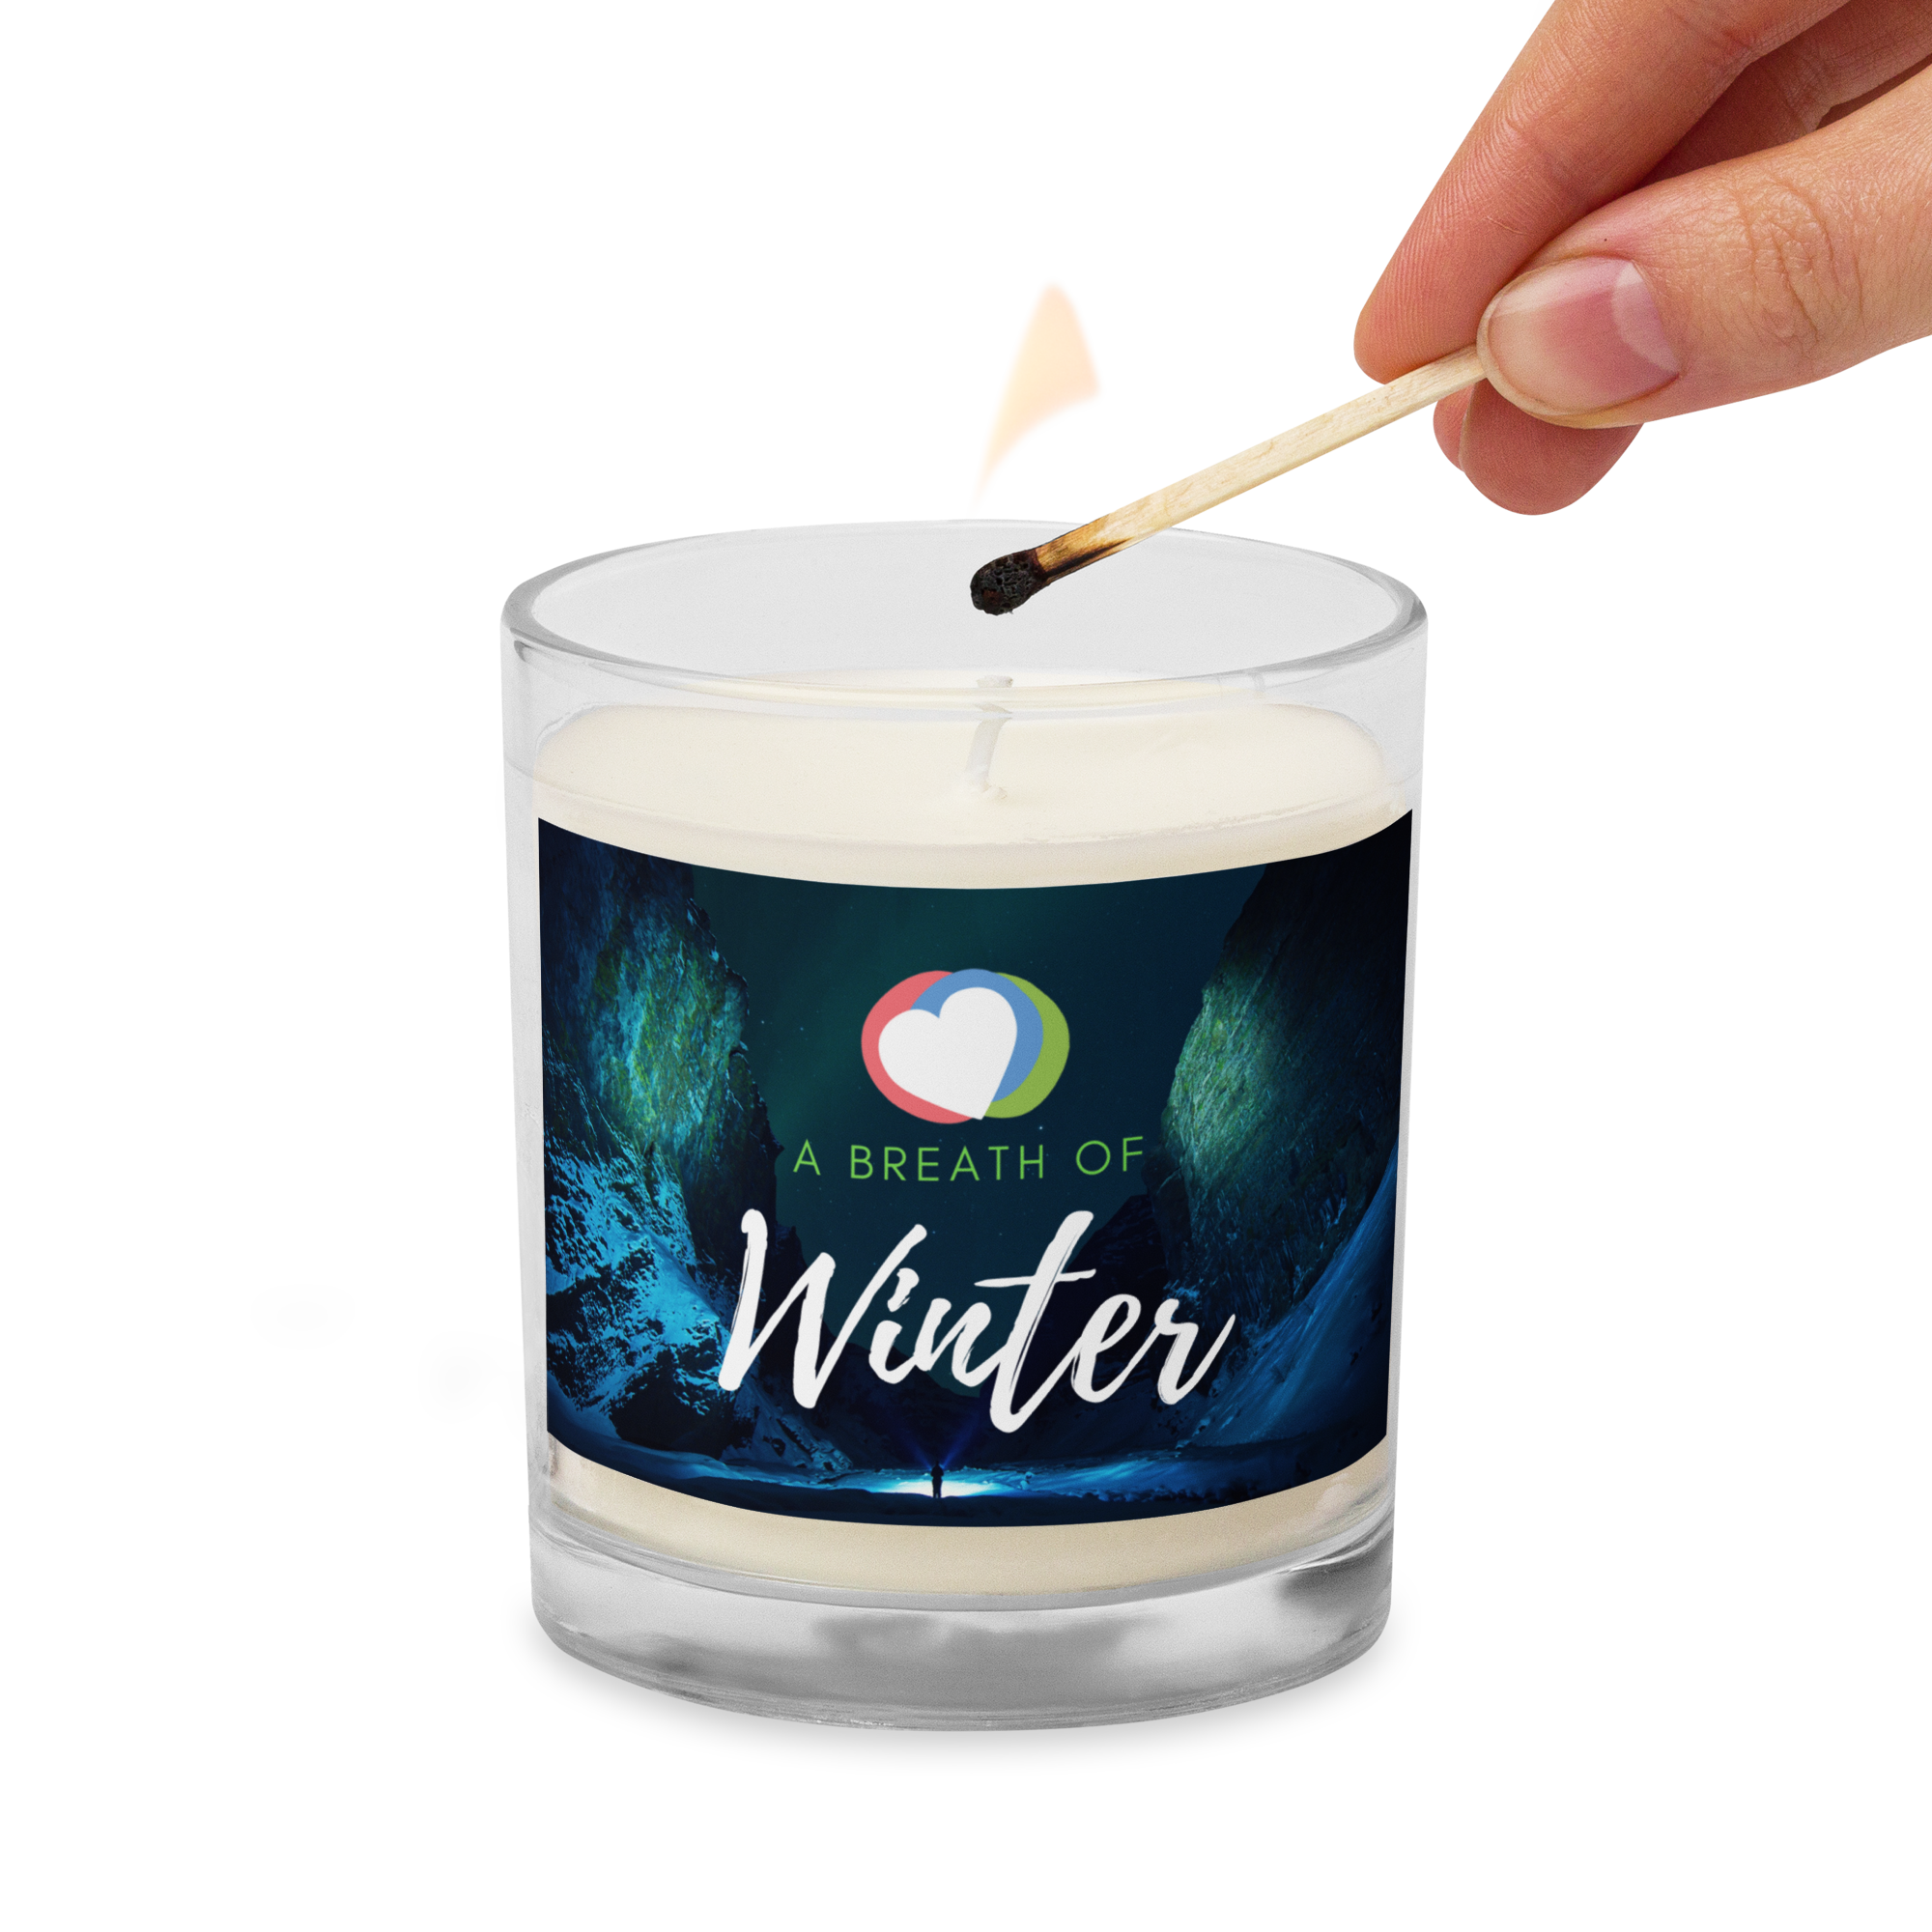 Jolly Christmas 2022 "A Breath of Winter" Glass Jar Soy Wax Candle